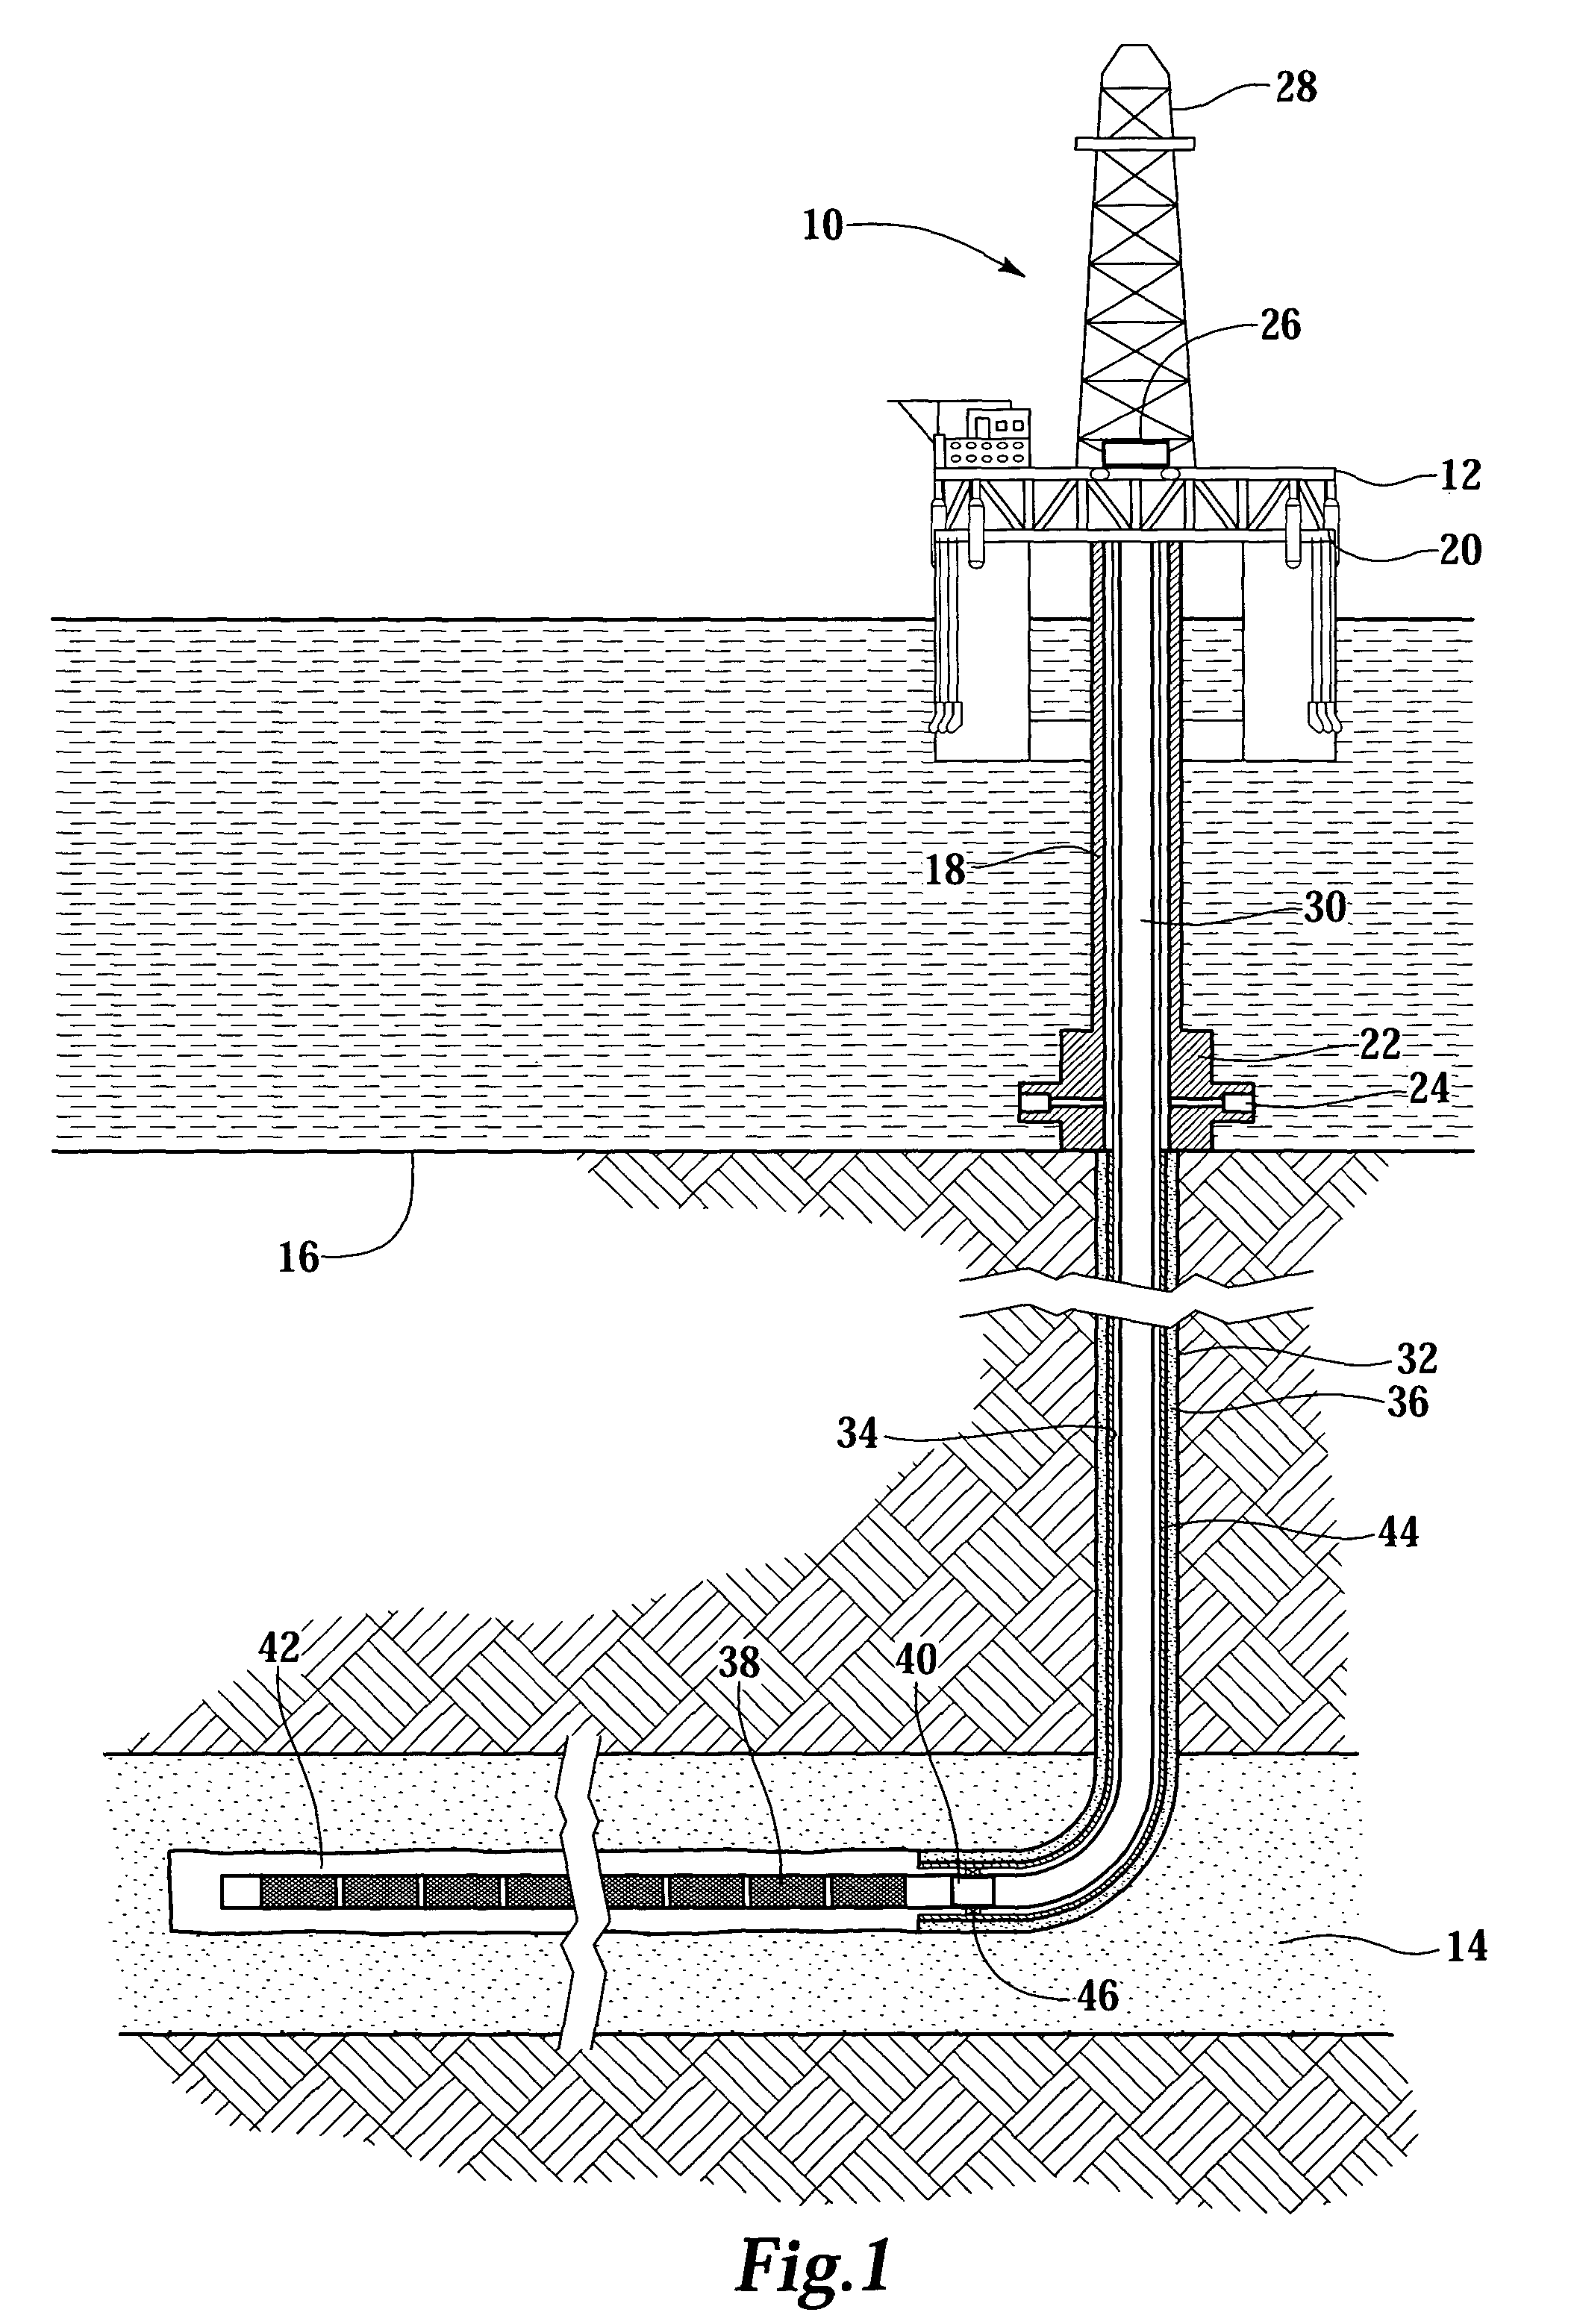 Apparatus and method for monitoring a treatment process in a production interval